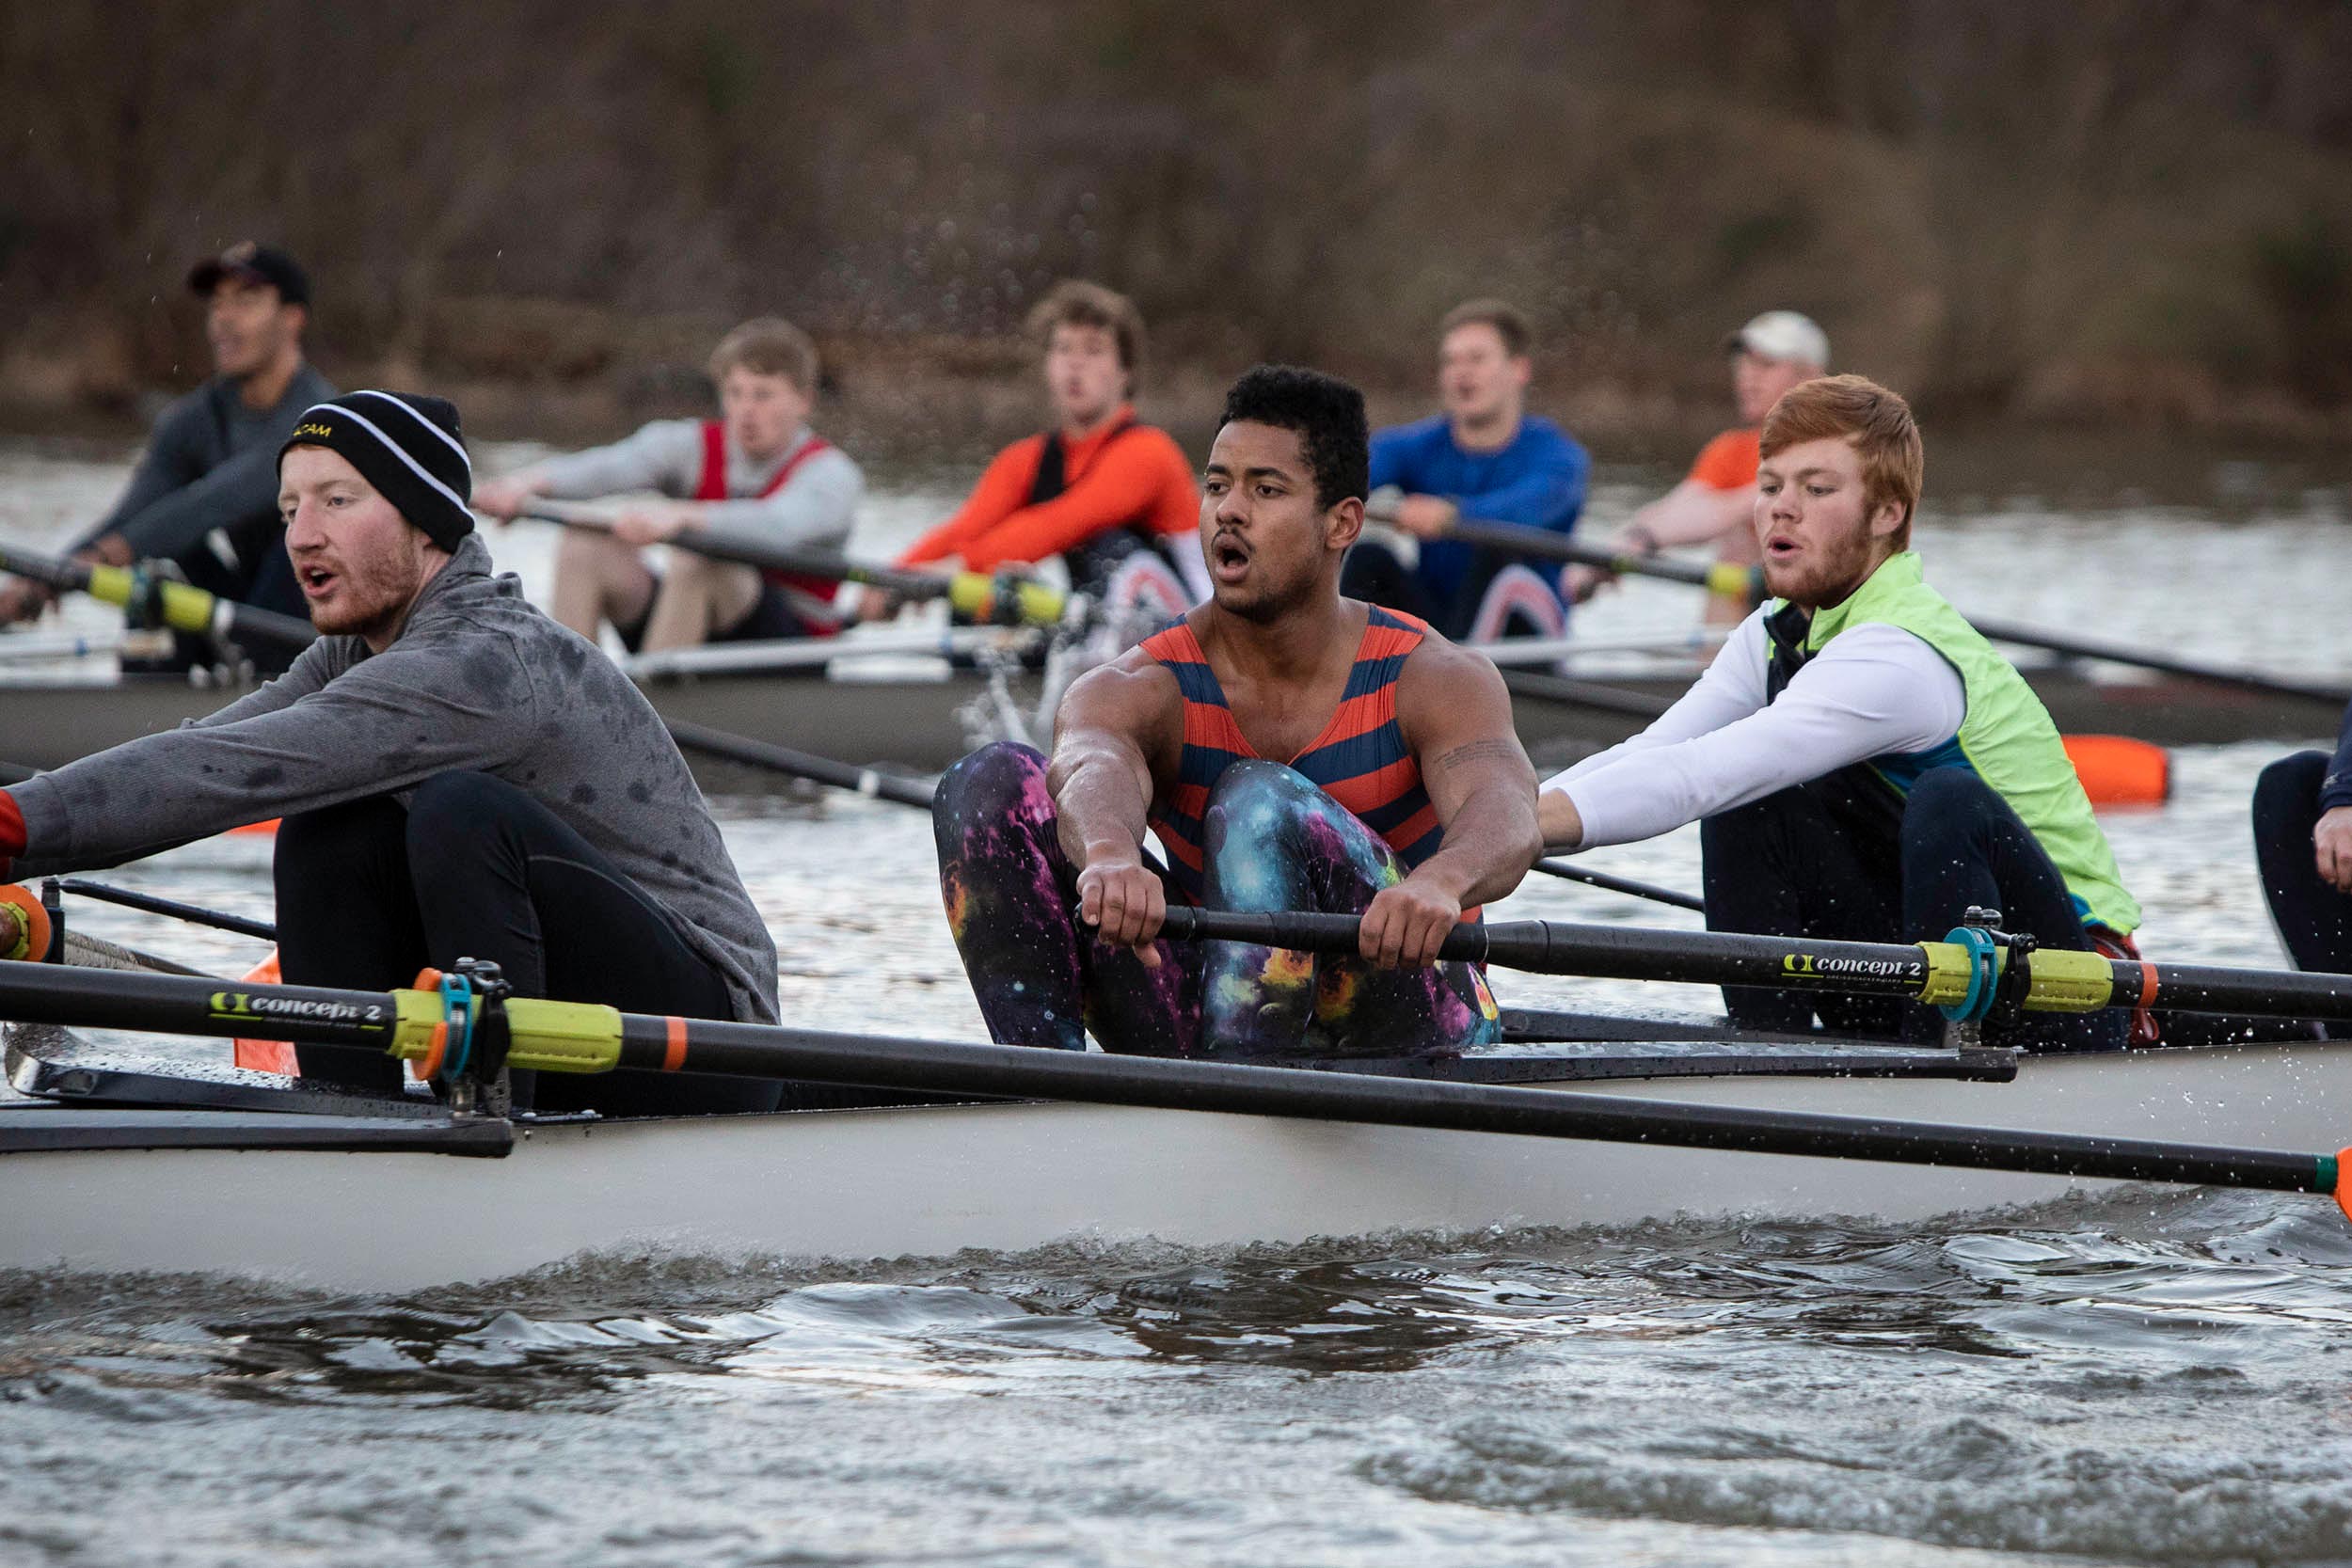 Billy Burris on the mens Rowing team rowing on a river